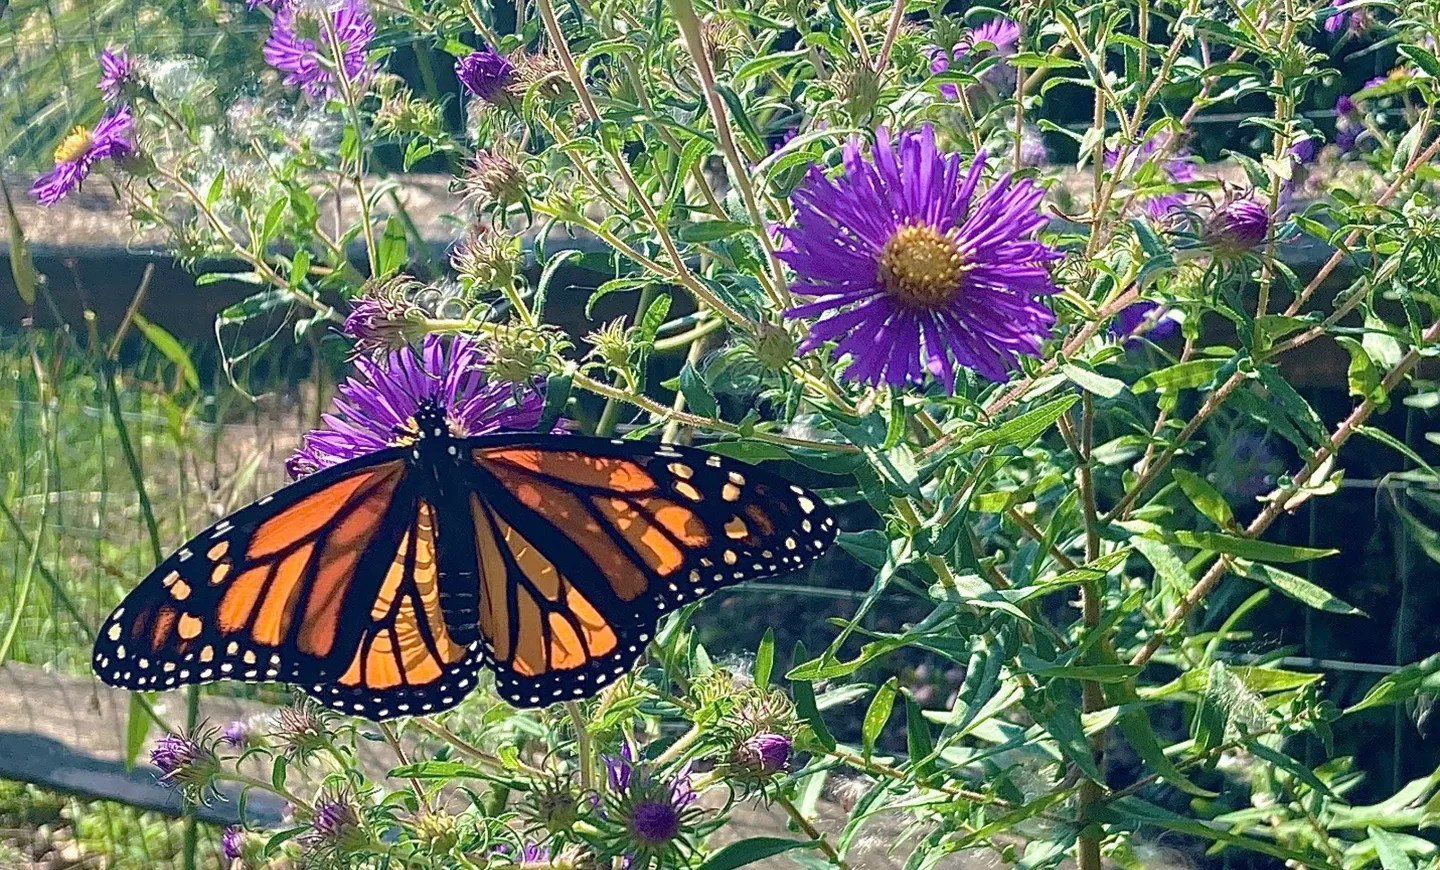 The threatened monarch butterfly on a New England aster (Symphyotrichum novae-angliae).